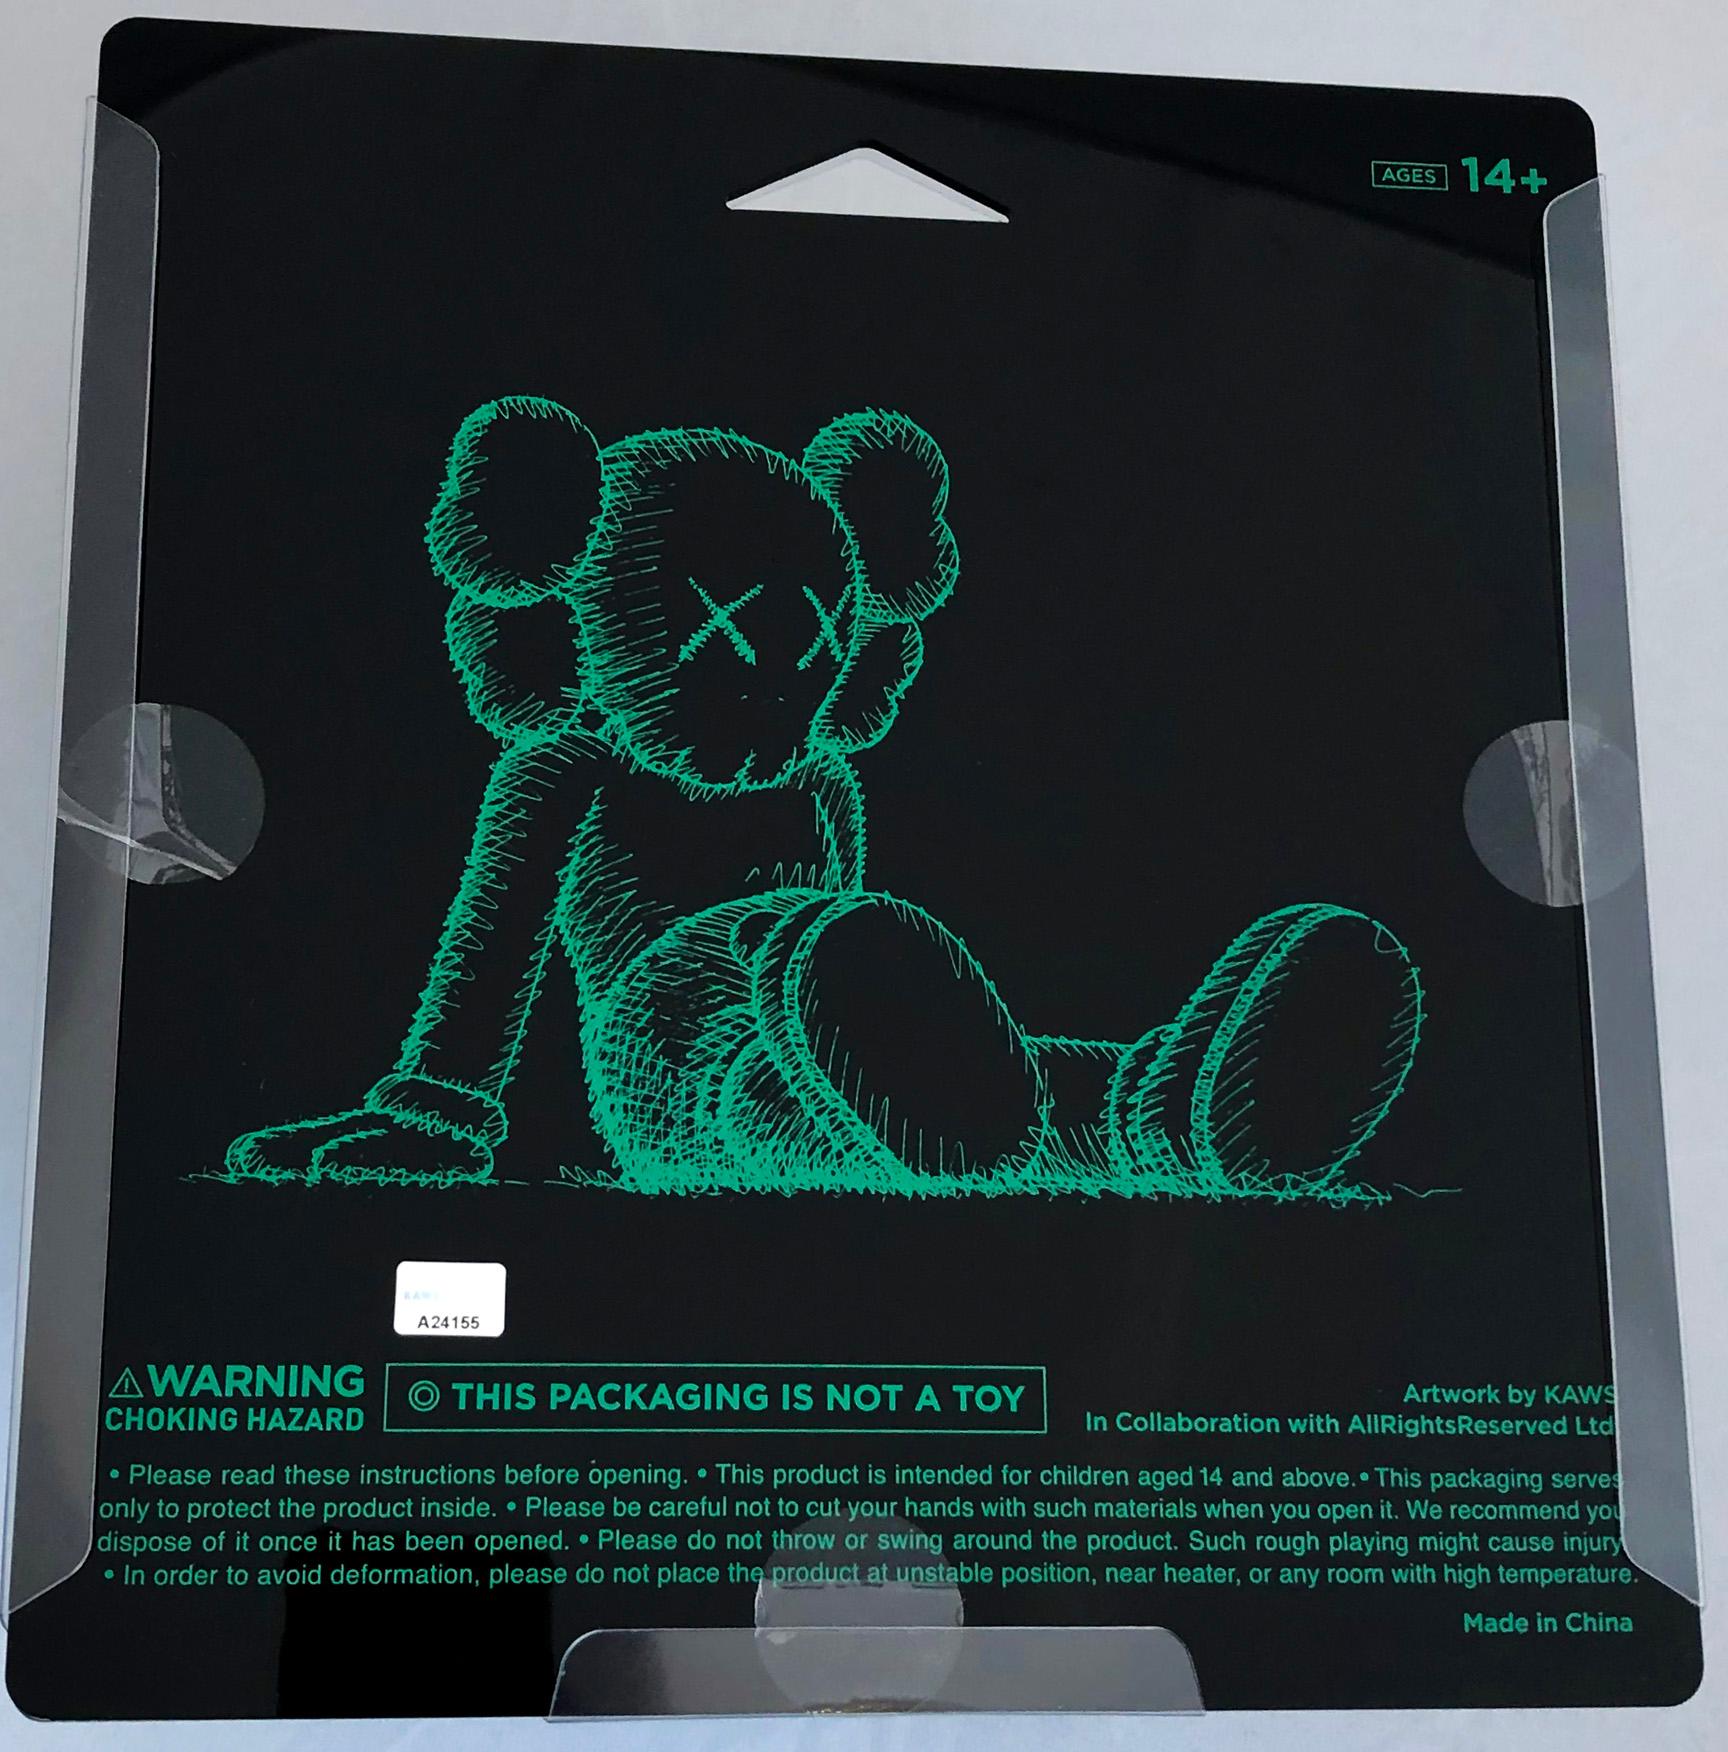 KAWS Black Holiday Companion (KAWS Taipei) 
This figurine features KAWS' signature character COMPANION in a resting seated position. This figurine was published by All Rights Reserved to commemorate the debut of KAWS’ largest sculptural endeavor to